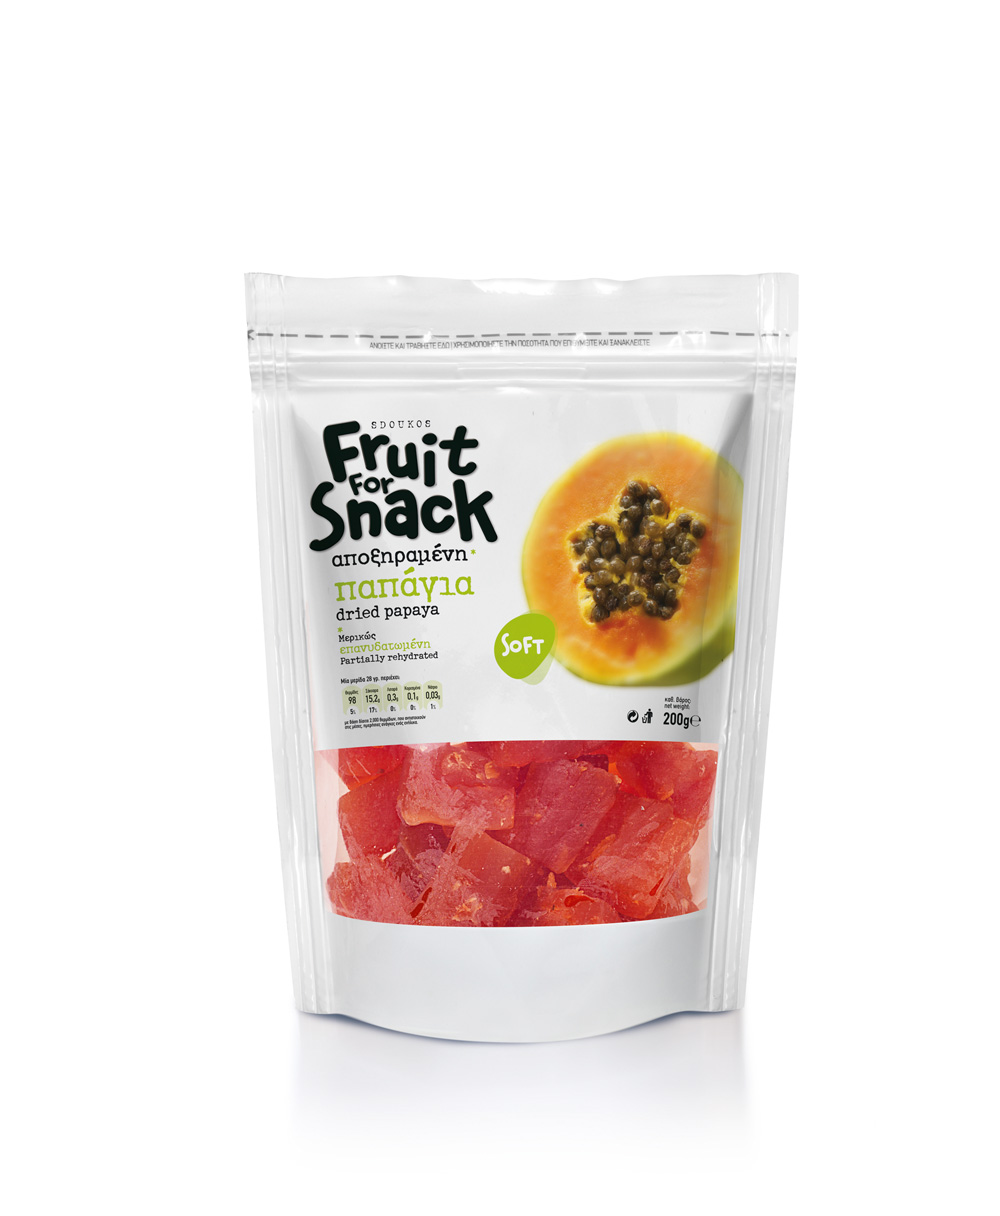 DRIED PAPAYA PARTIALLY REHYDRATED “FRUIT FOR SNACK” 200g